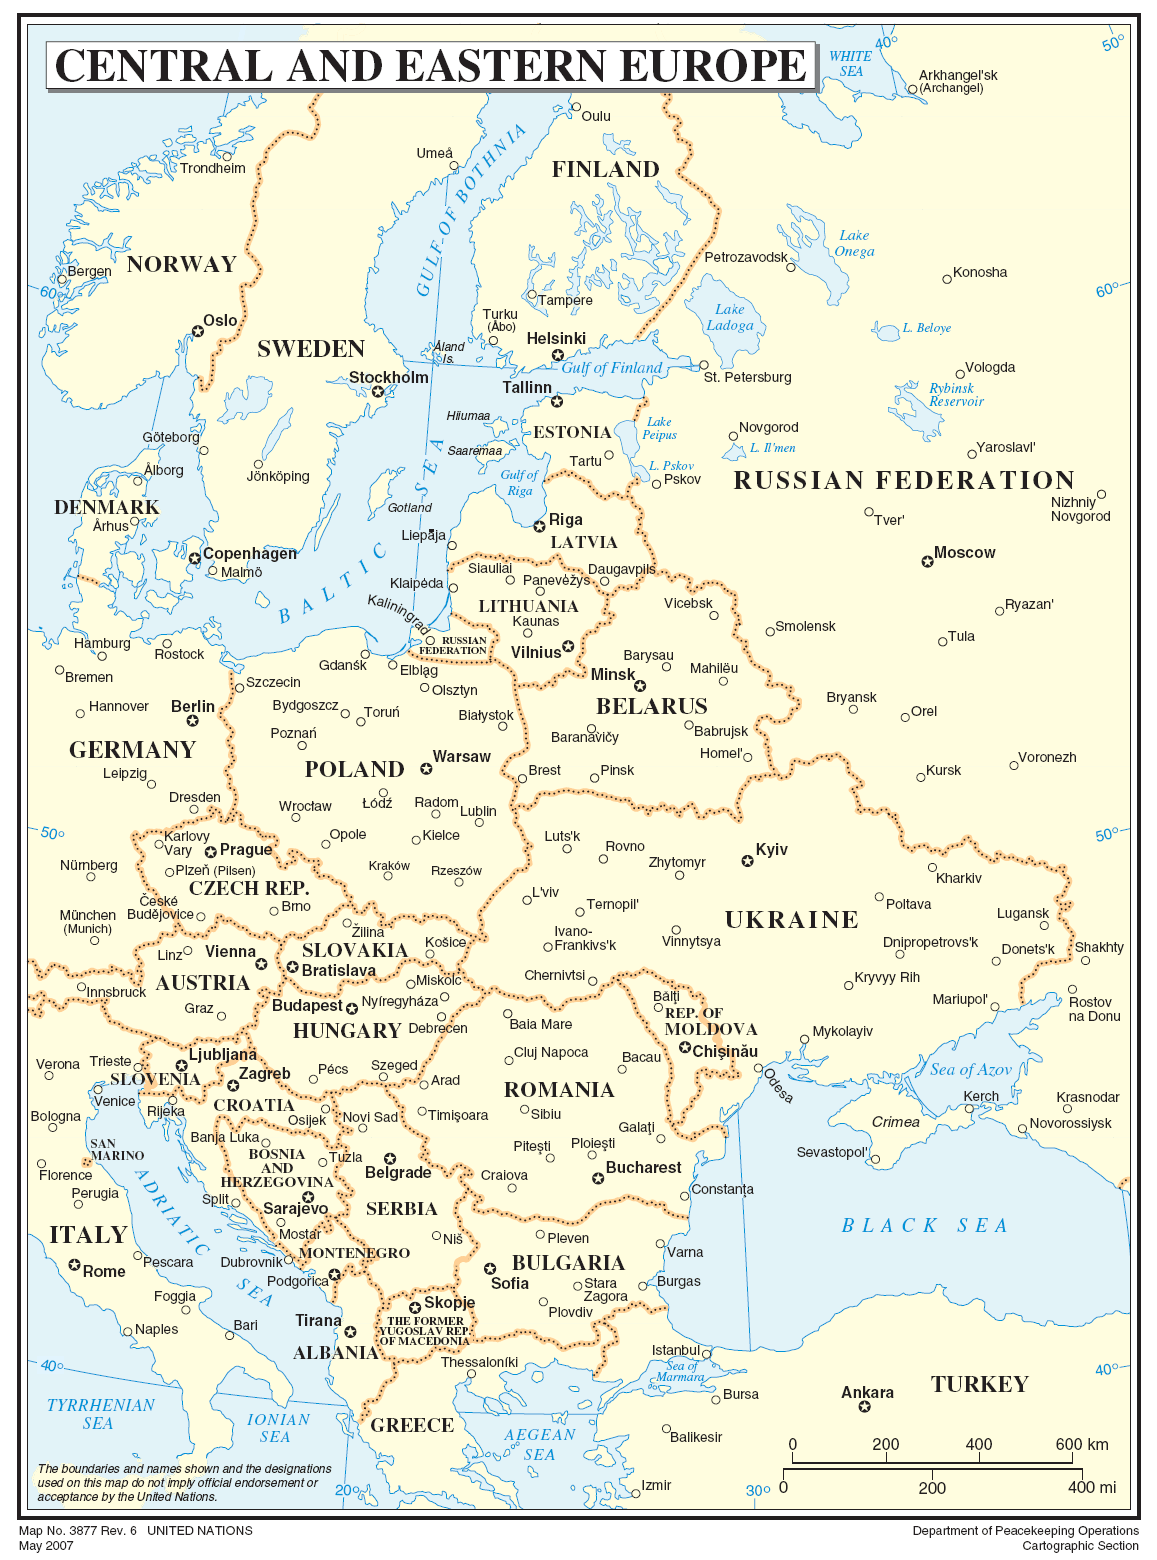 Map of Central and Eastern Europe